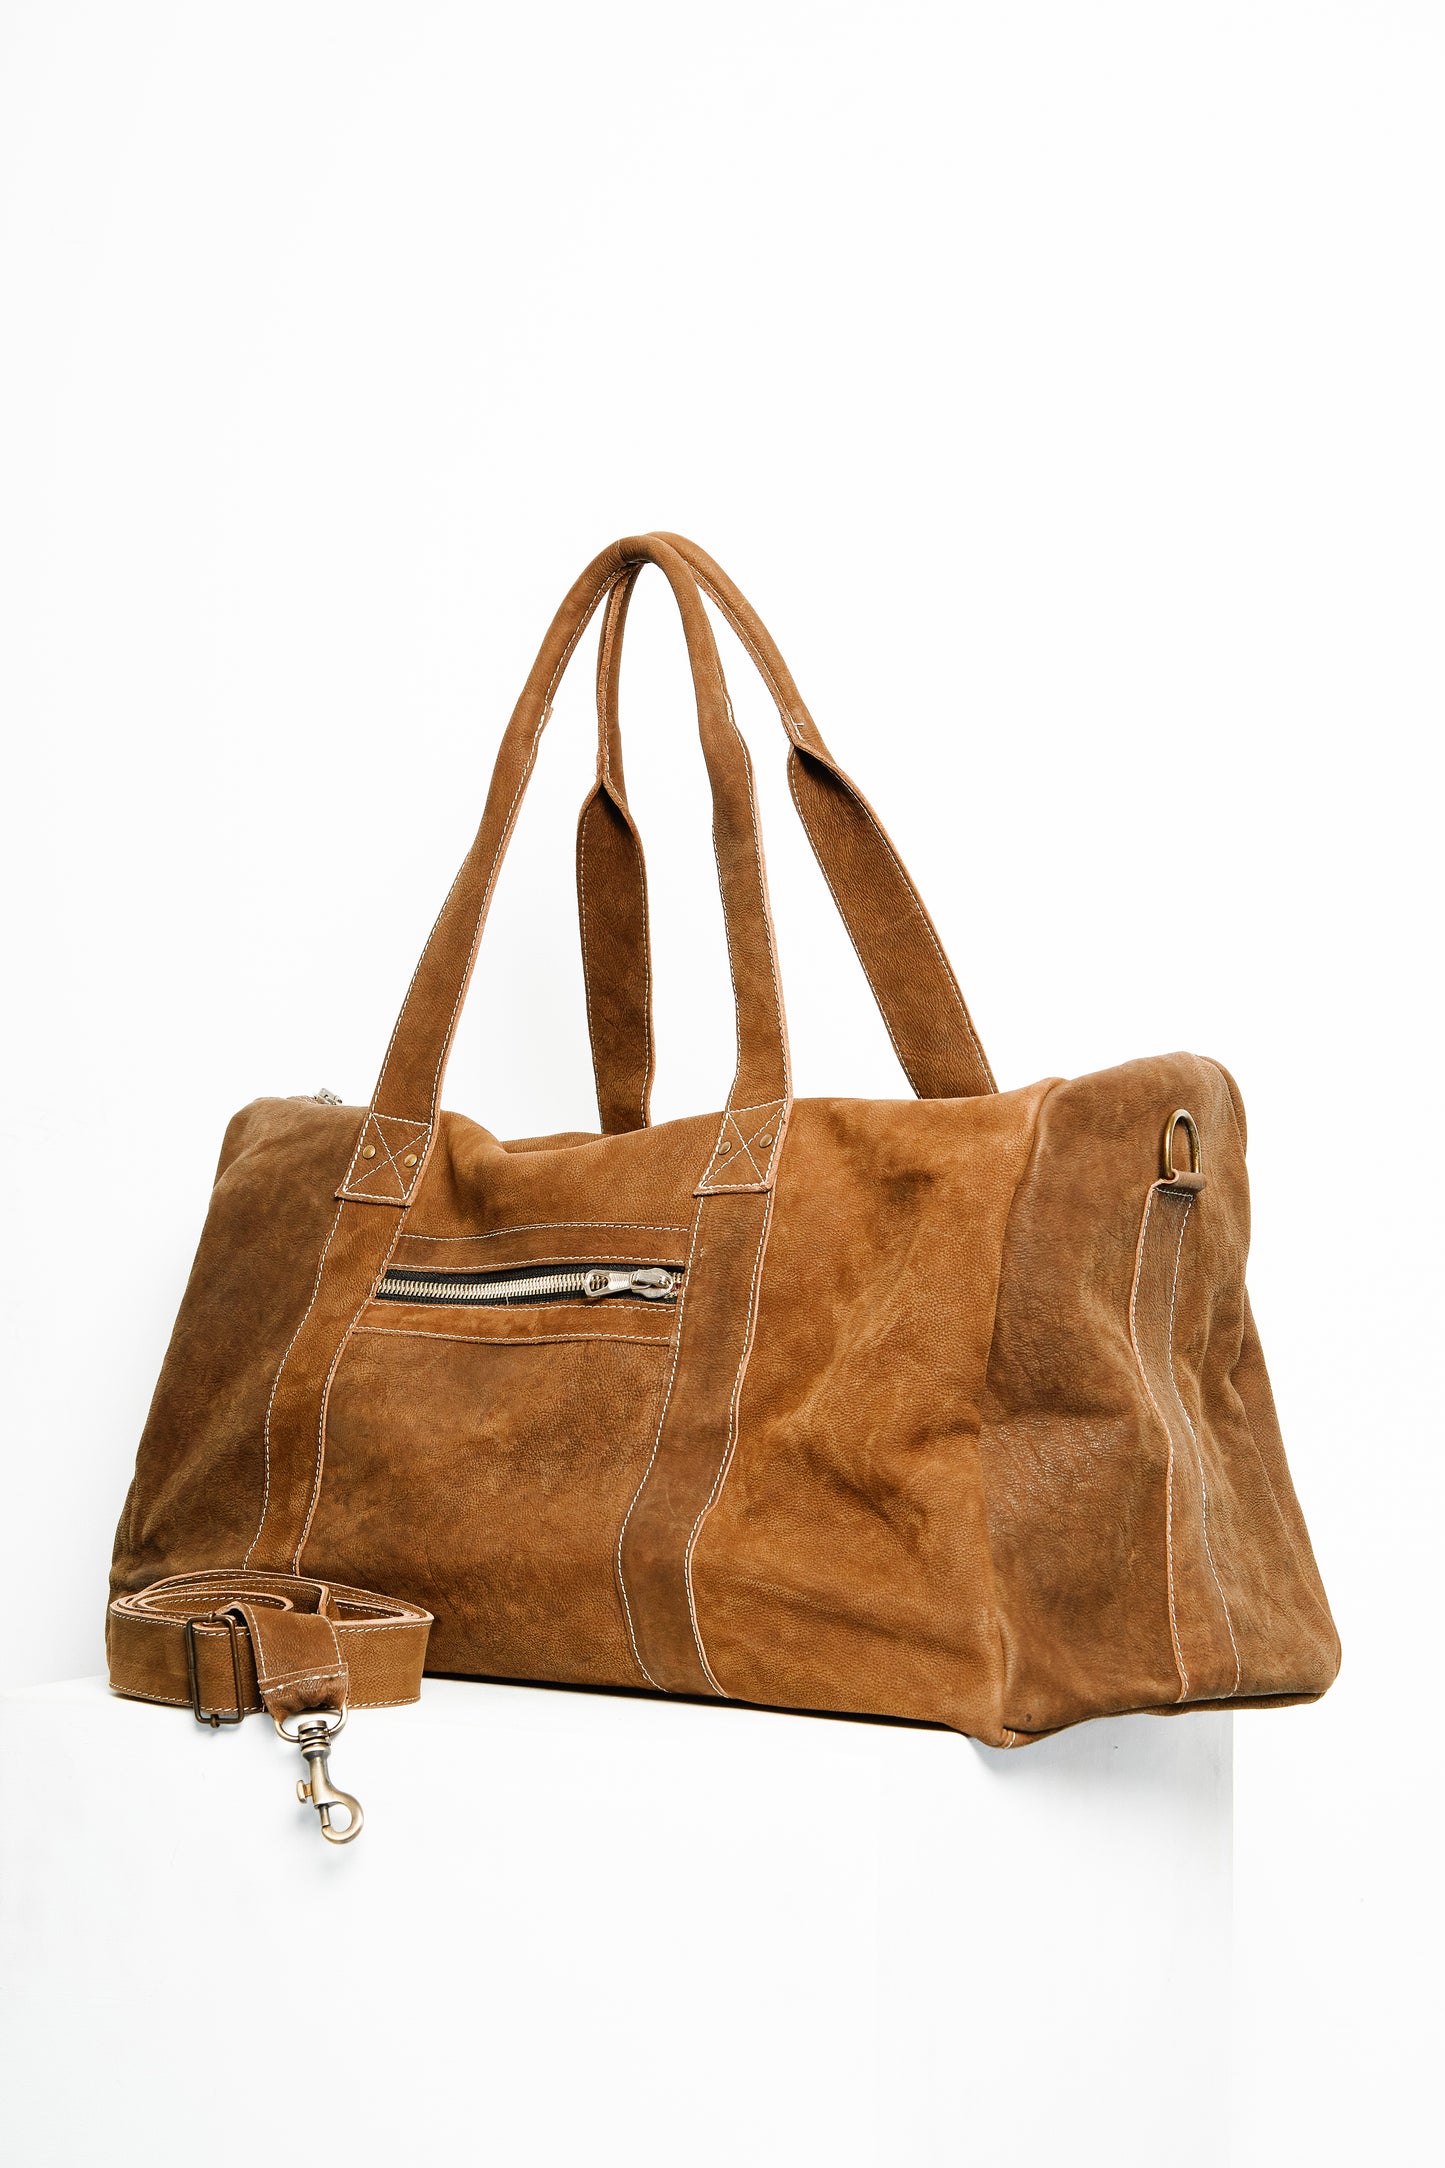 The leather bag